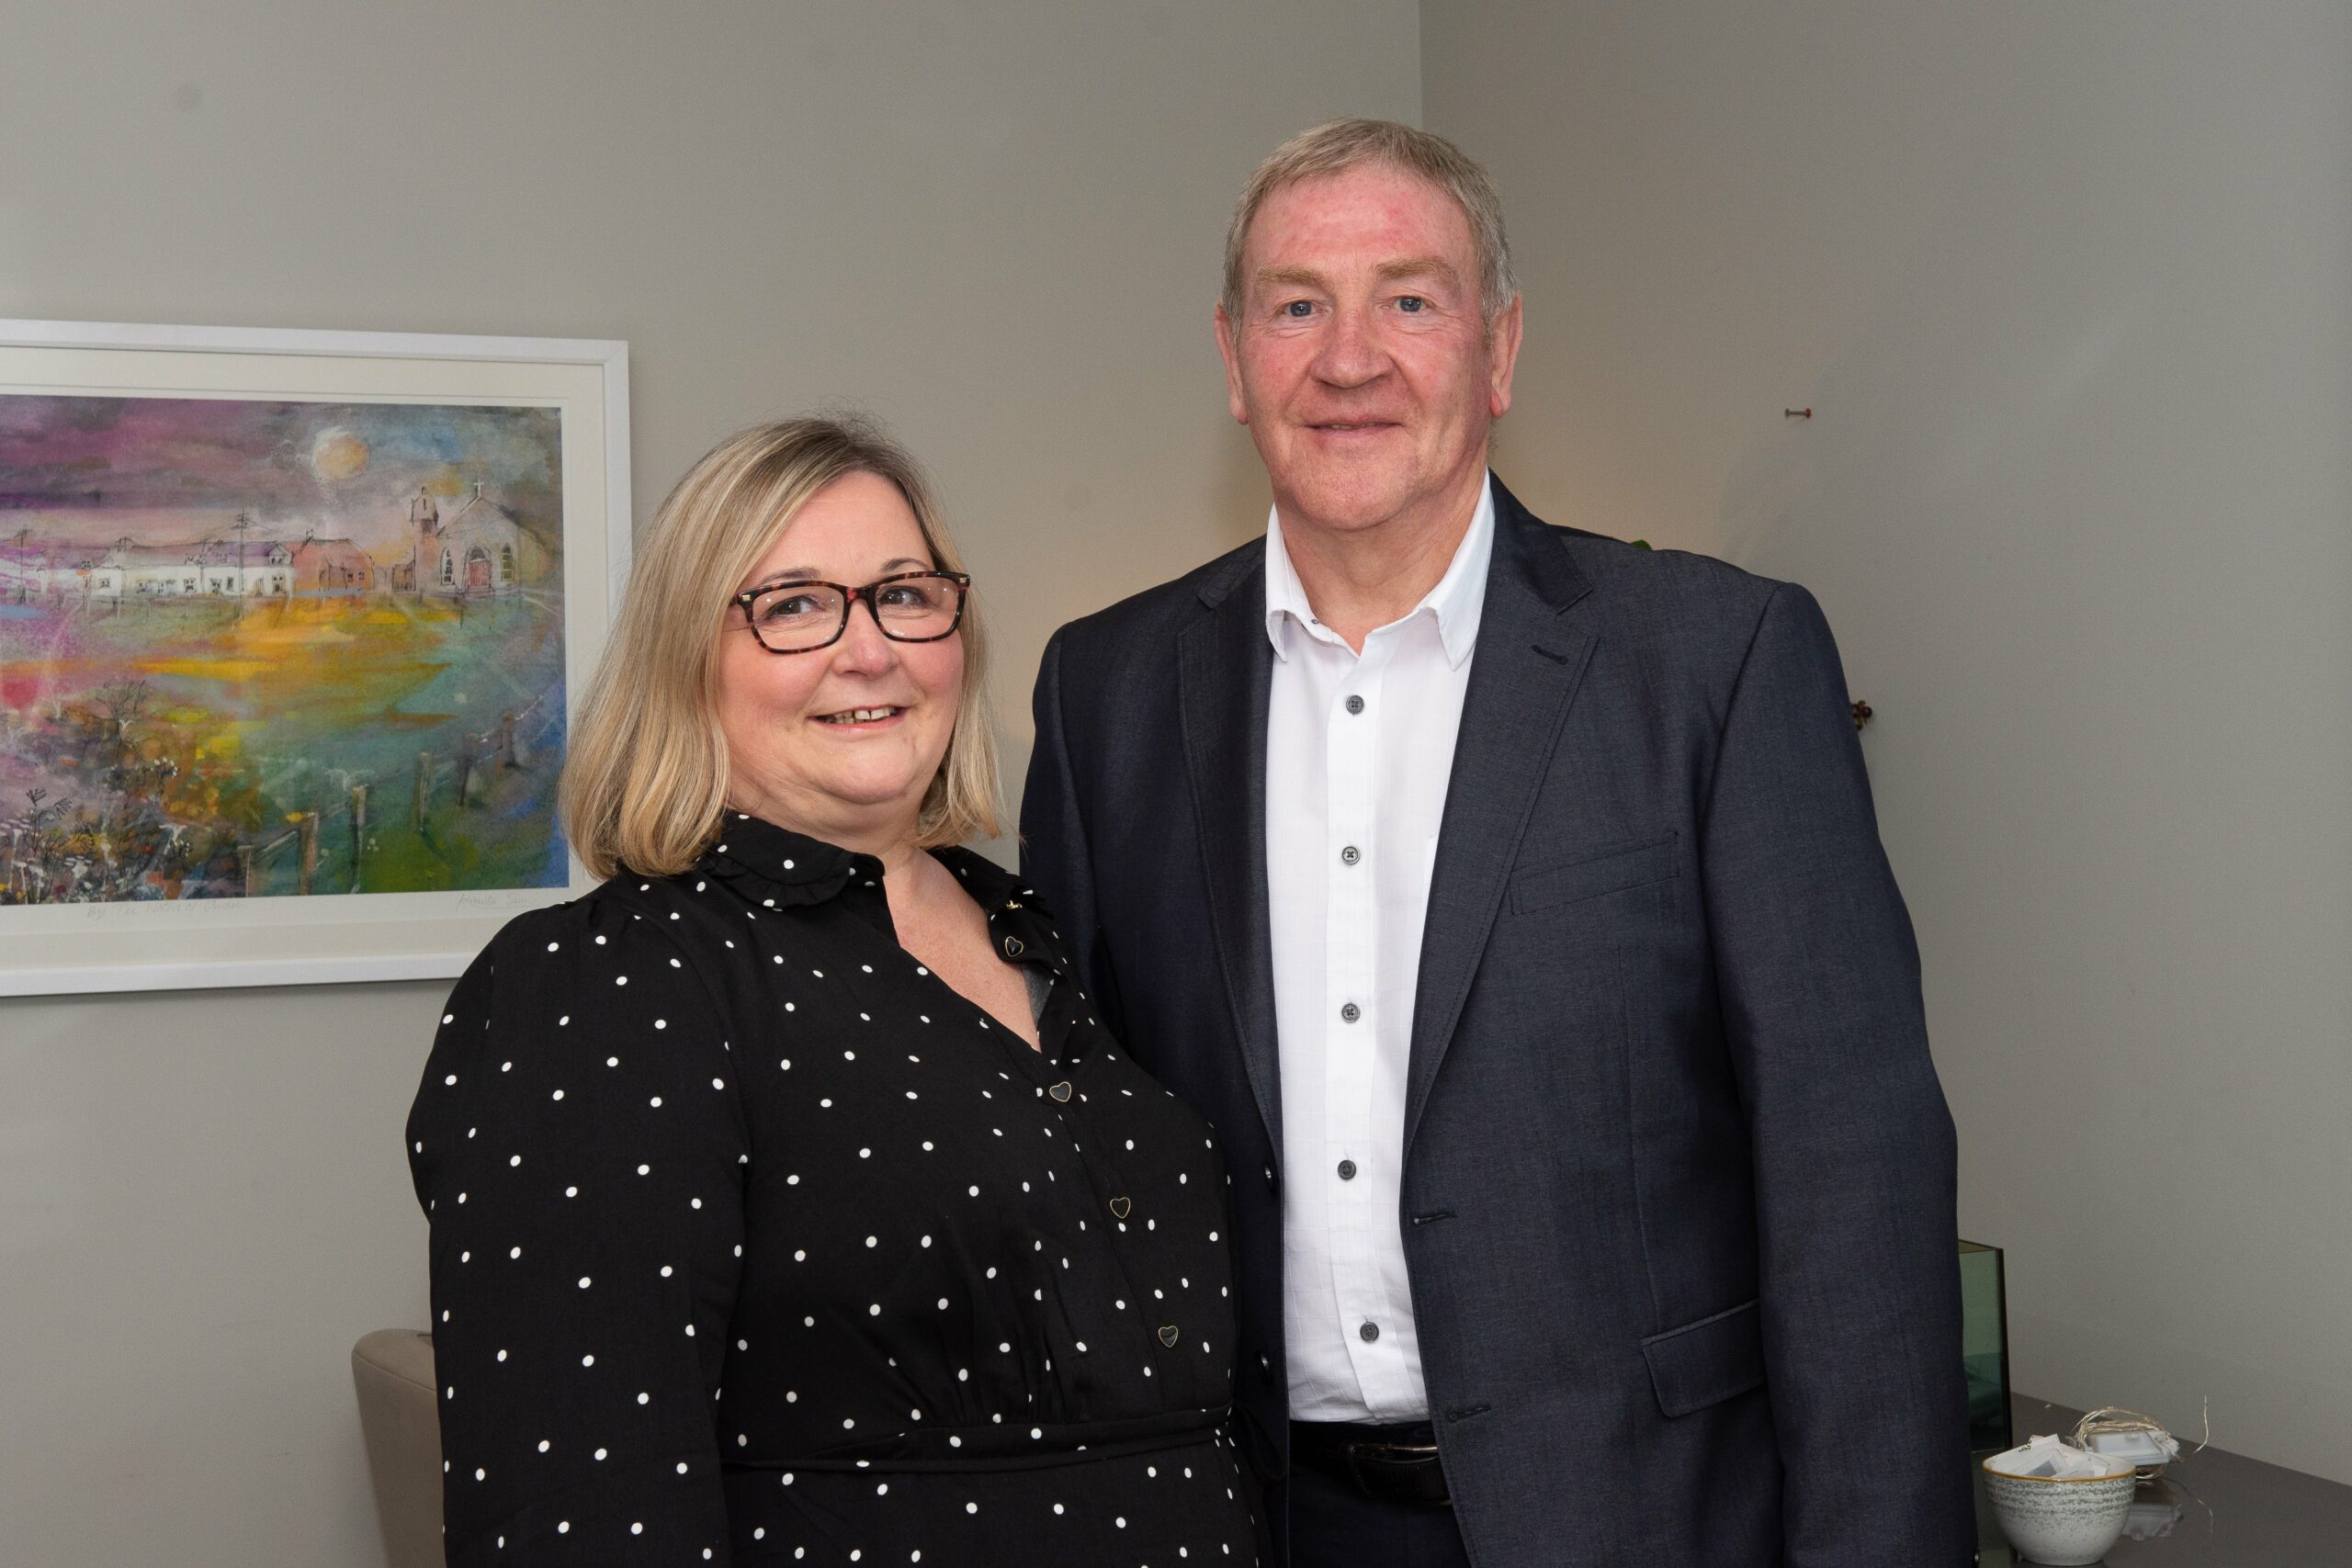 MEMBER NEWS: Susan Mackie appointed chair of north-east charity Scarf